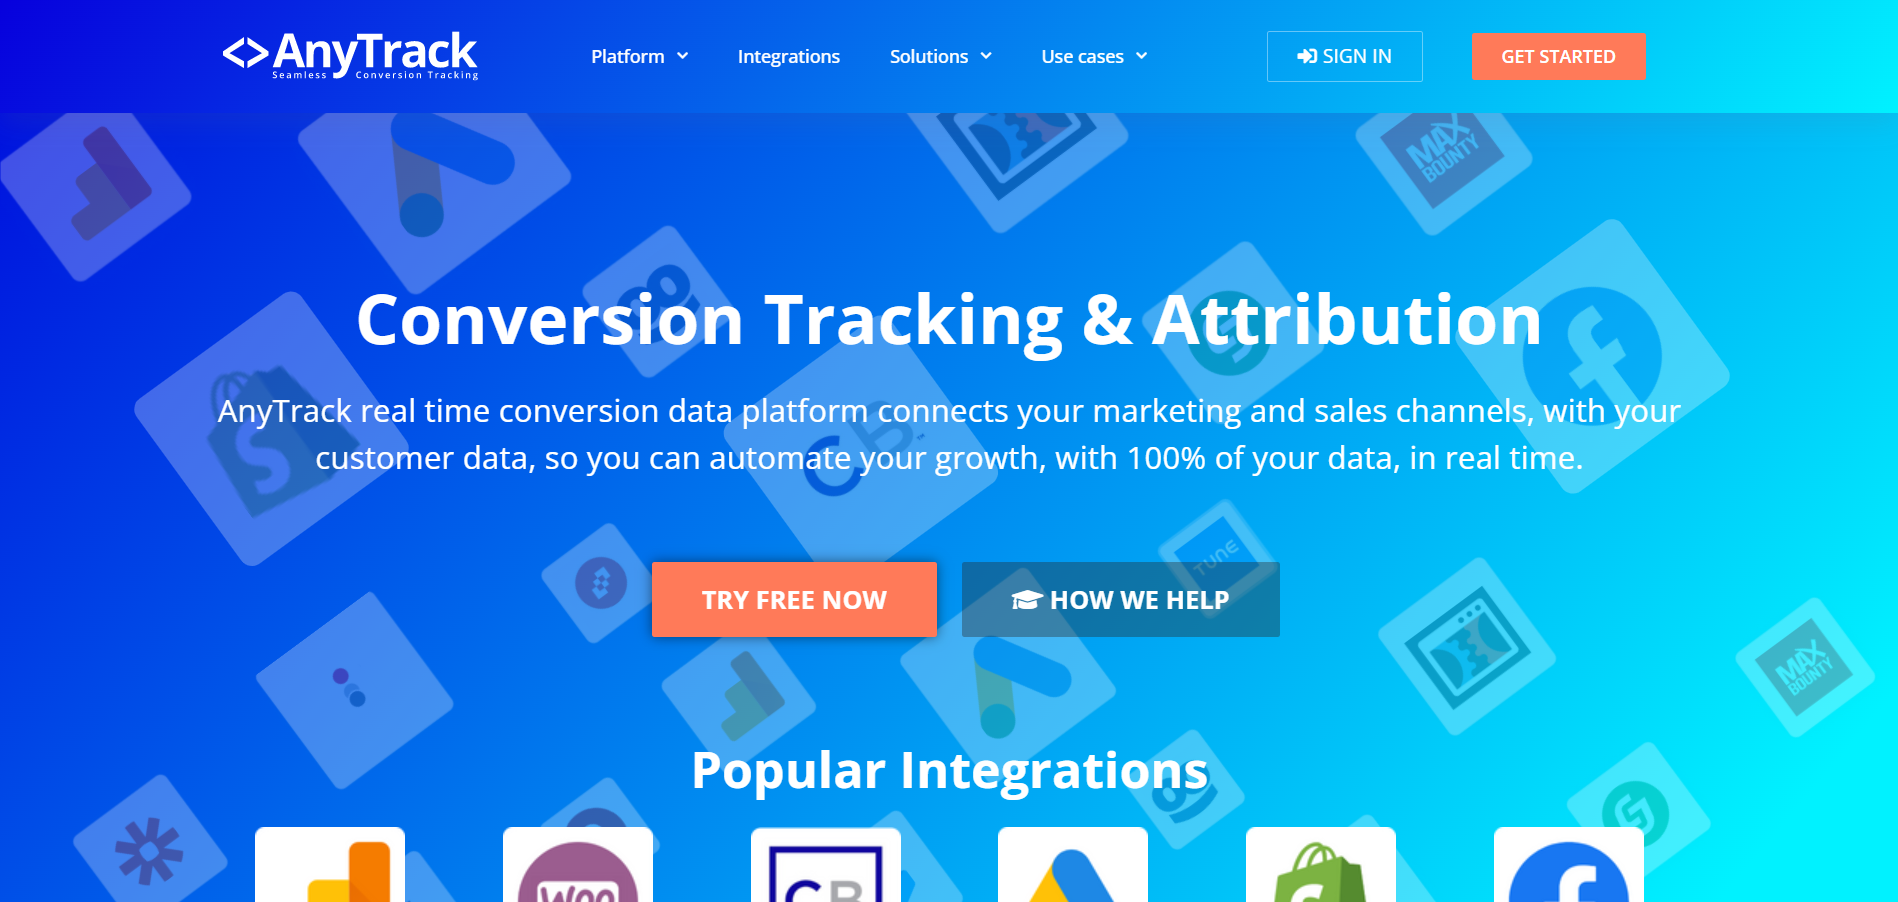 AnyTrack Main Page